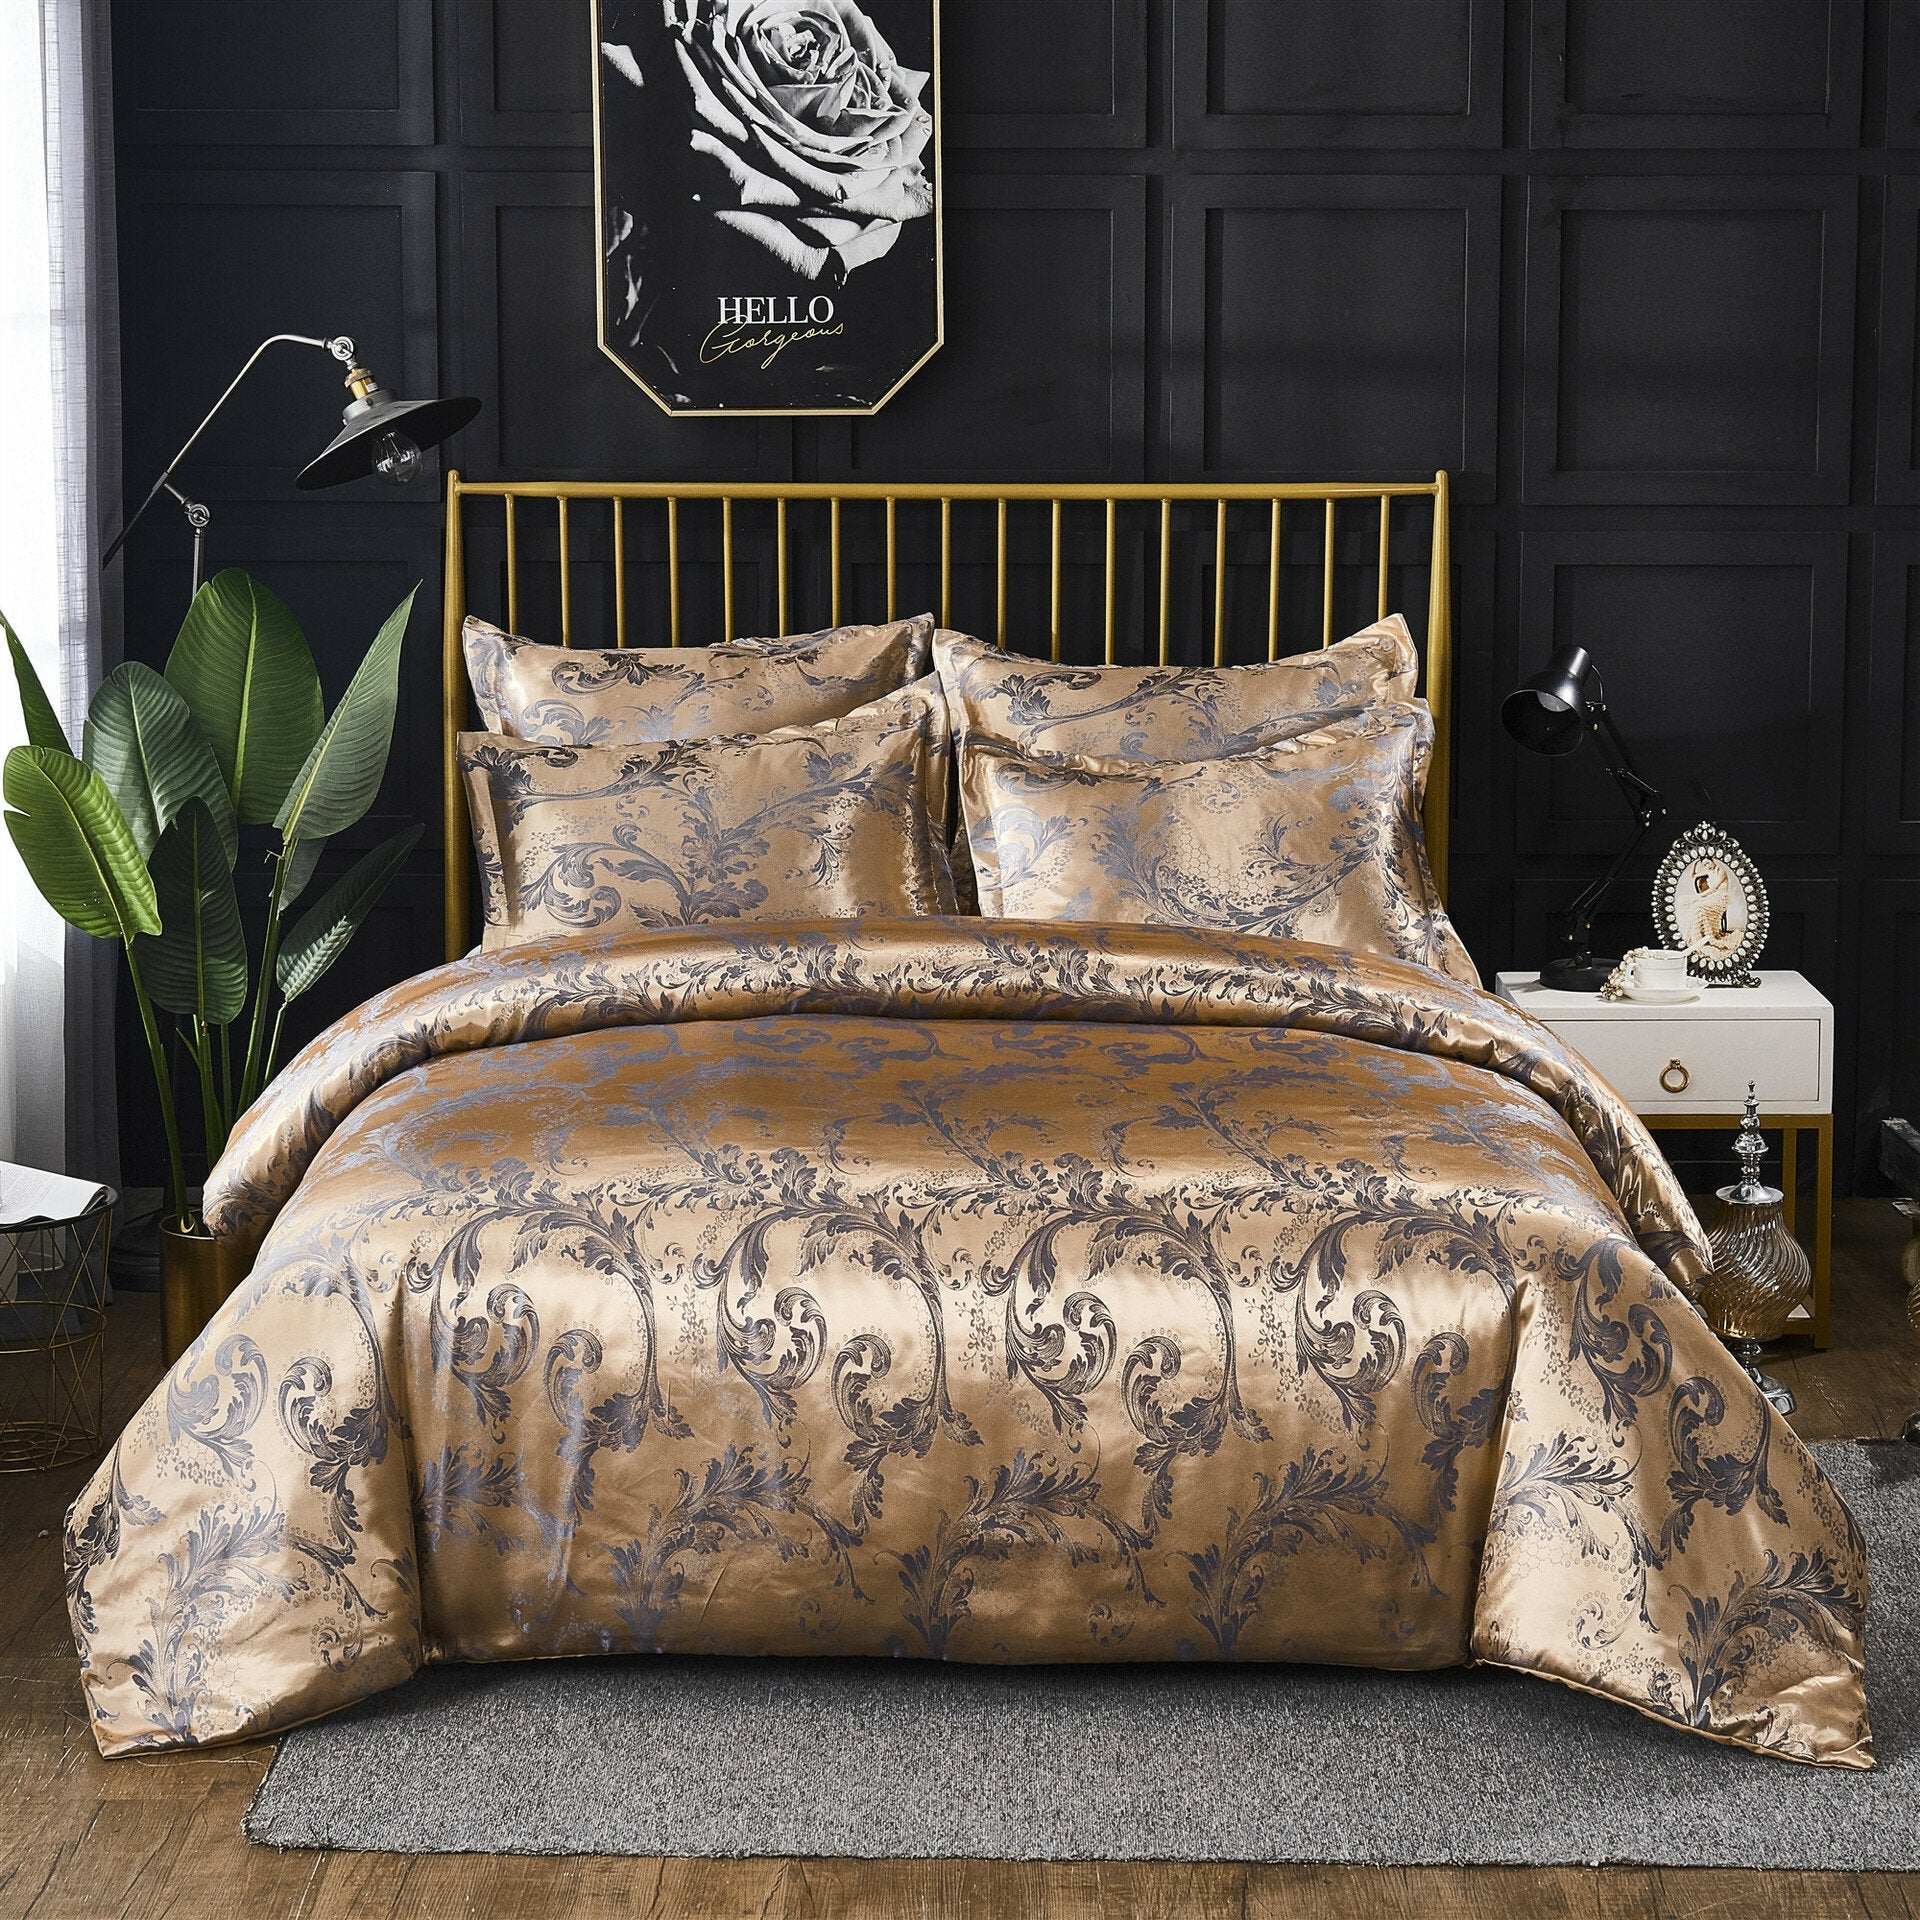 Image of Luxury Silk Like Comforter Sets Queen Satin Jacquard Paisley Brushed Heart Quilted Bedding Sets with Pillowcases